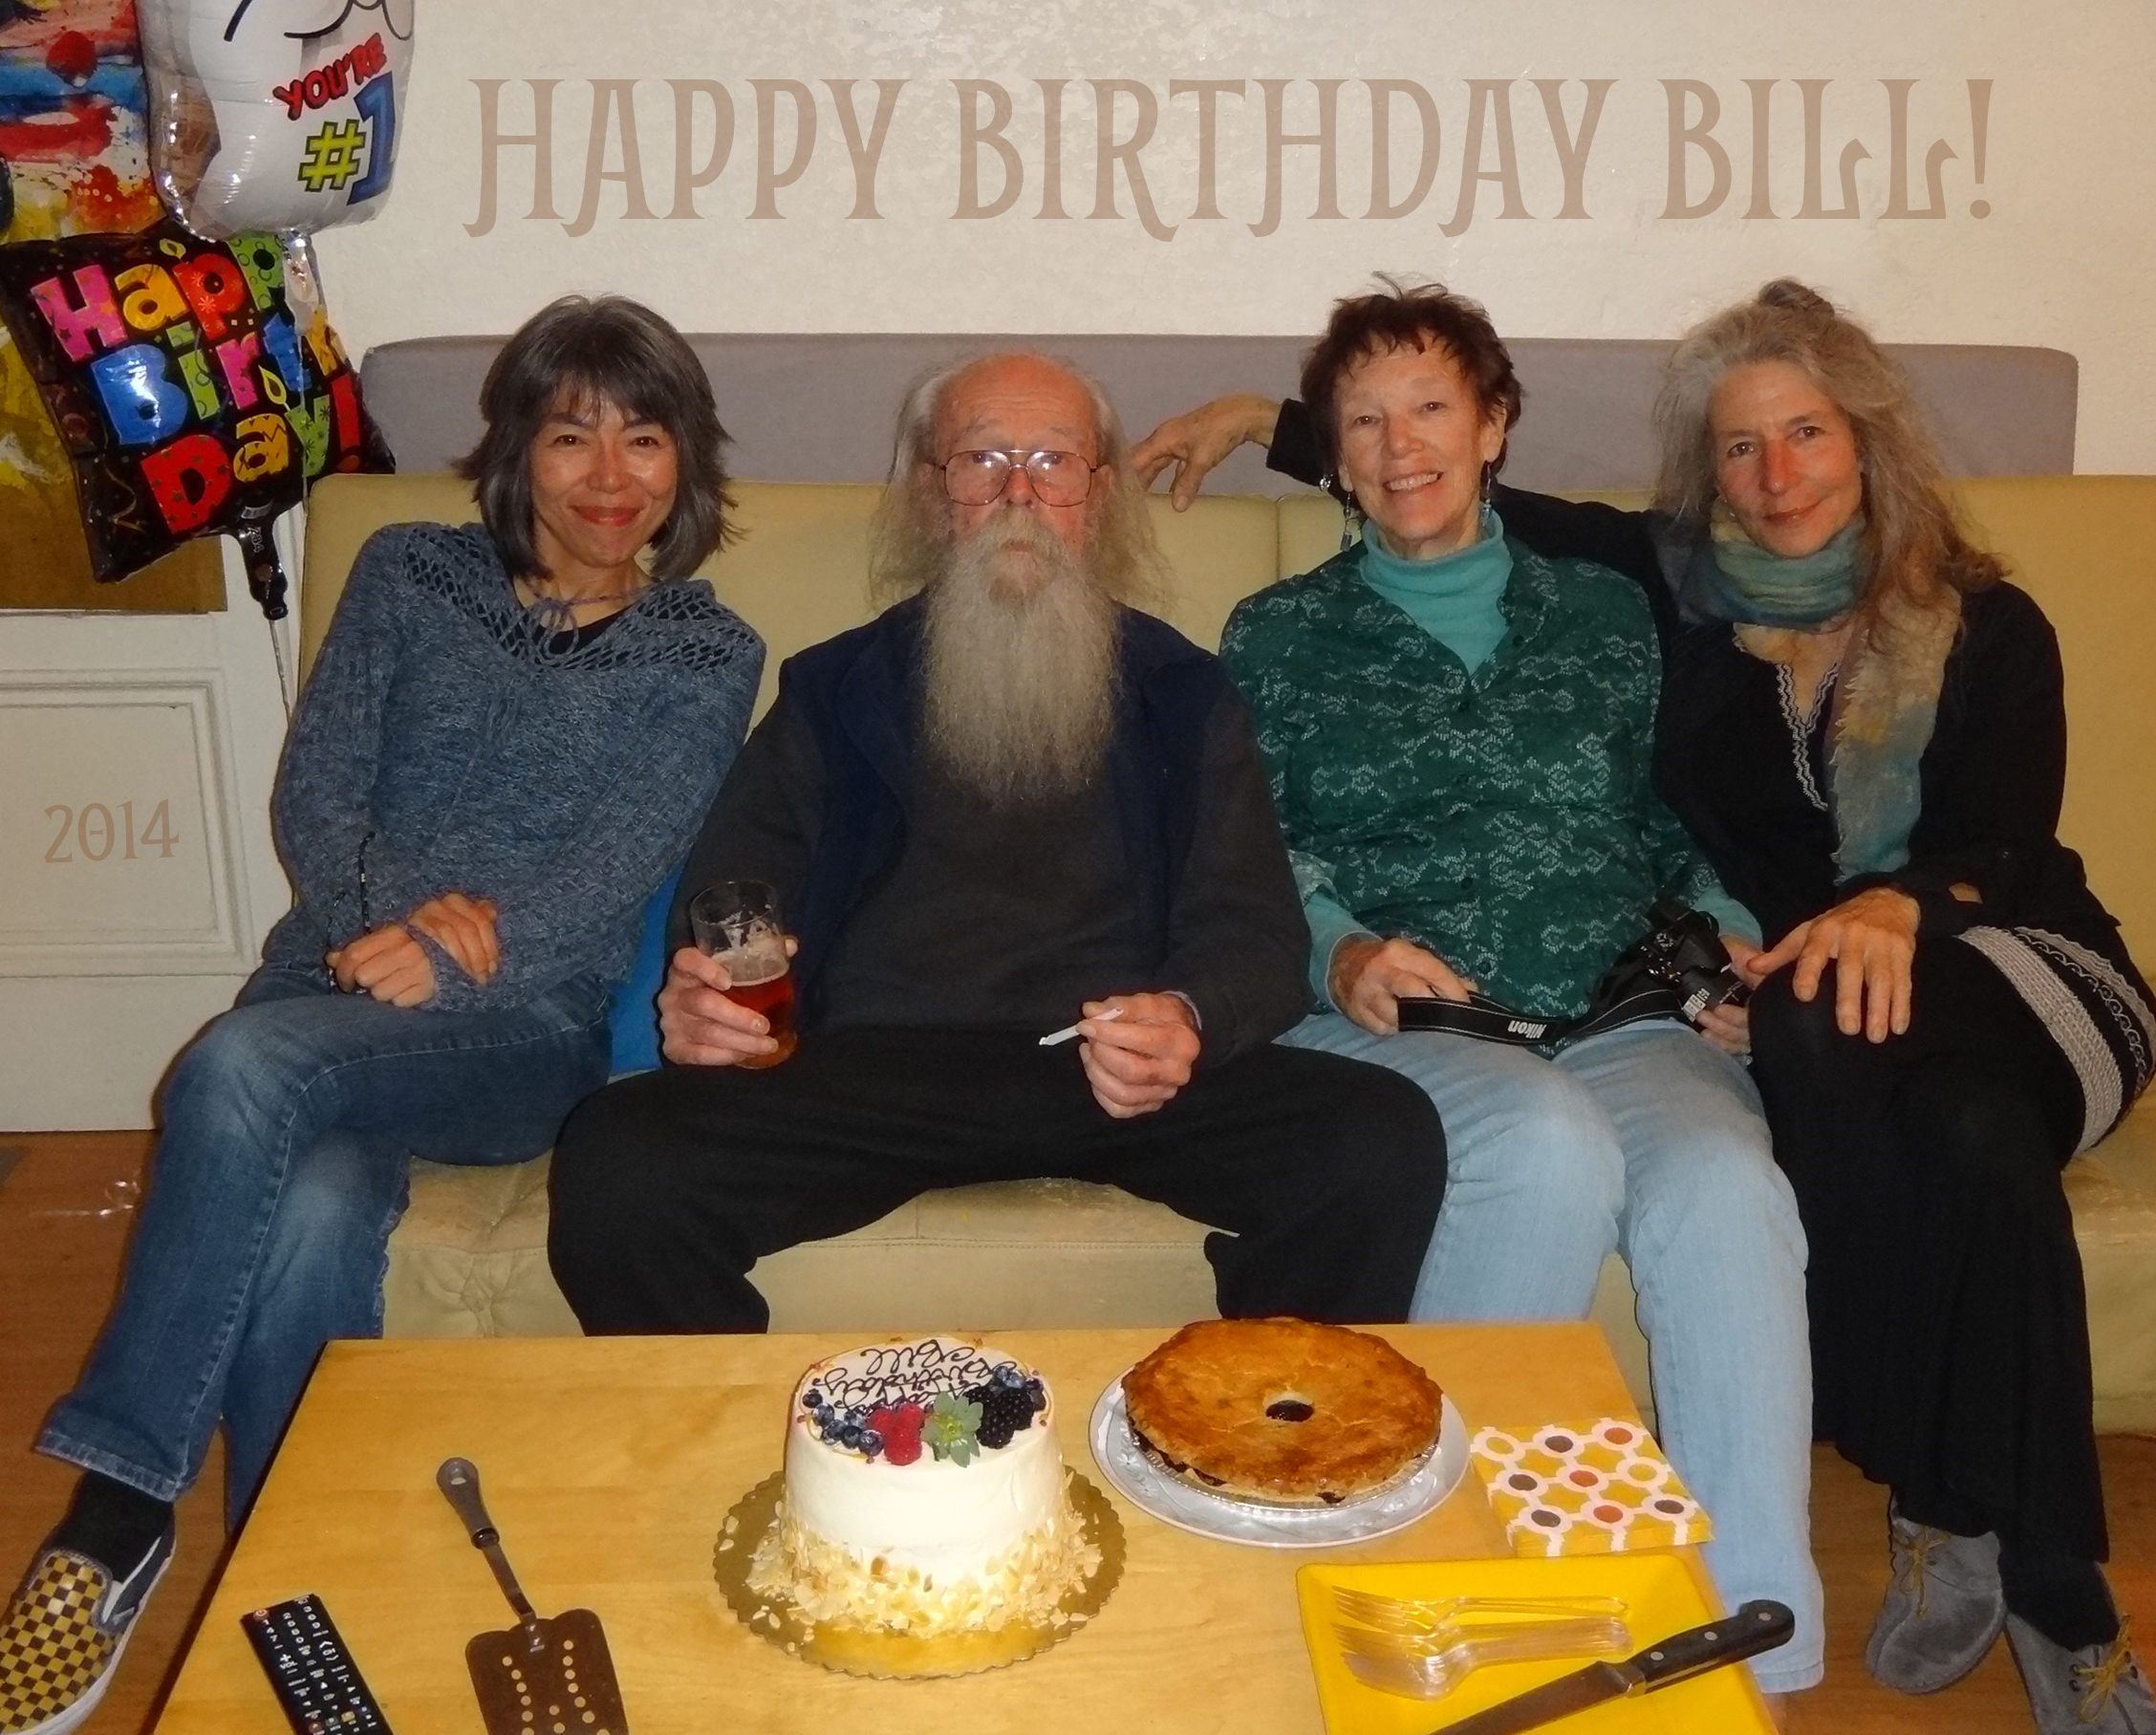 BILL’S BIRTHDAY with Lucy, Johne, and emi, 2014, photo by kaishi